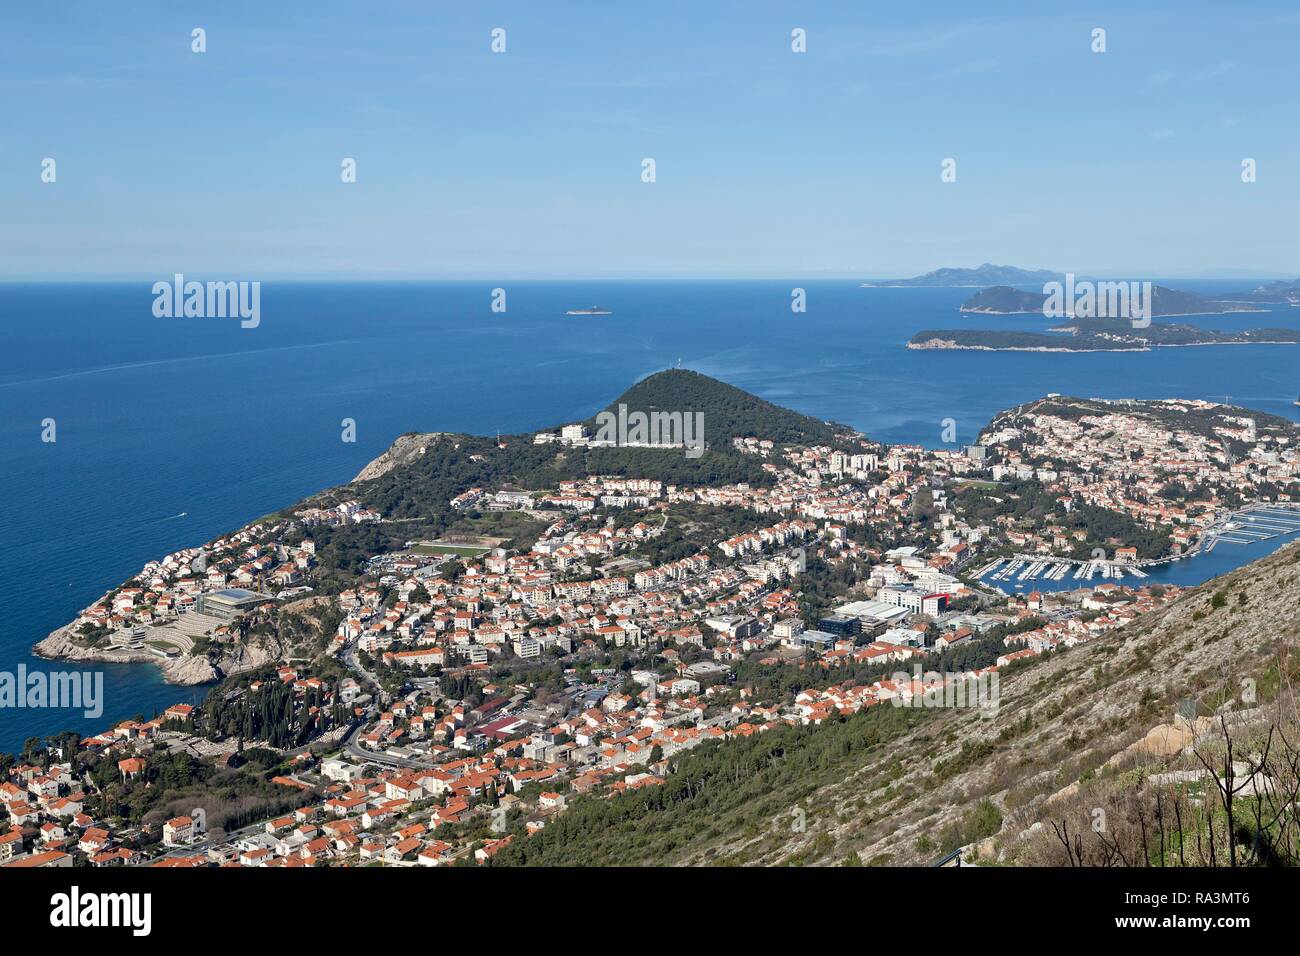 View of Dubrovnik from Mount Srd, Croatia Stock Photo